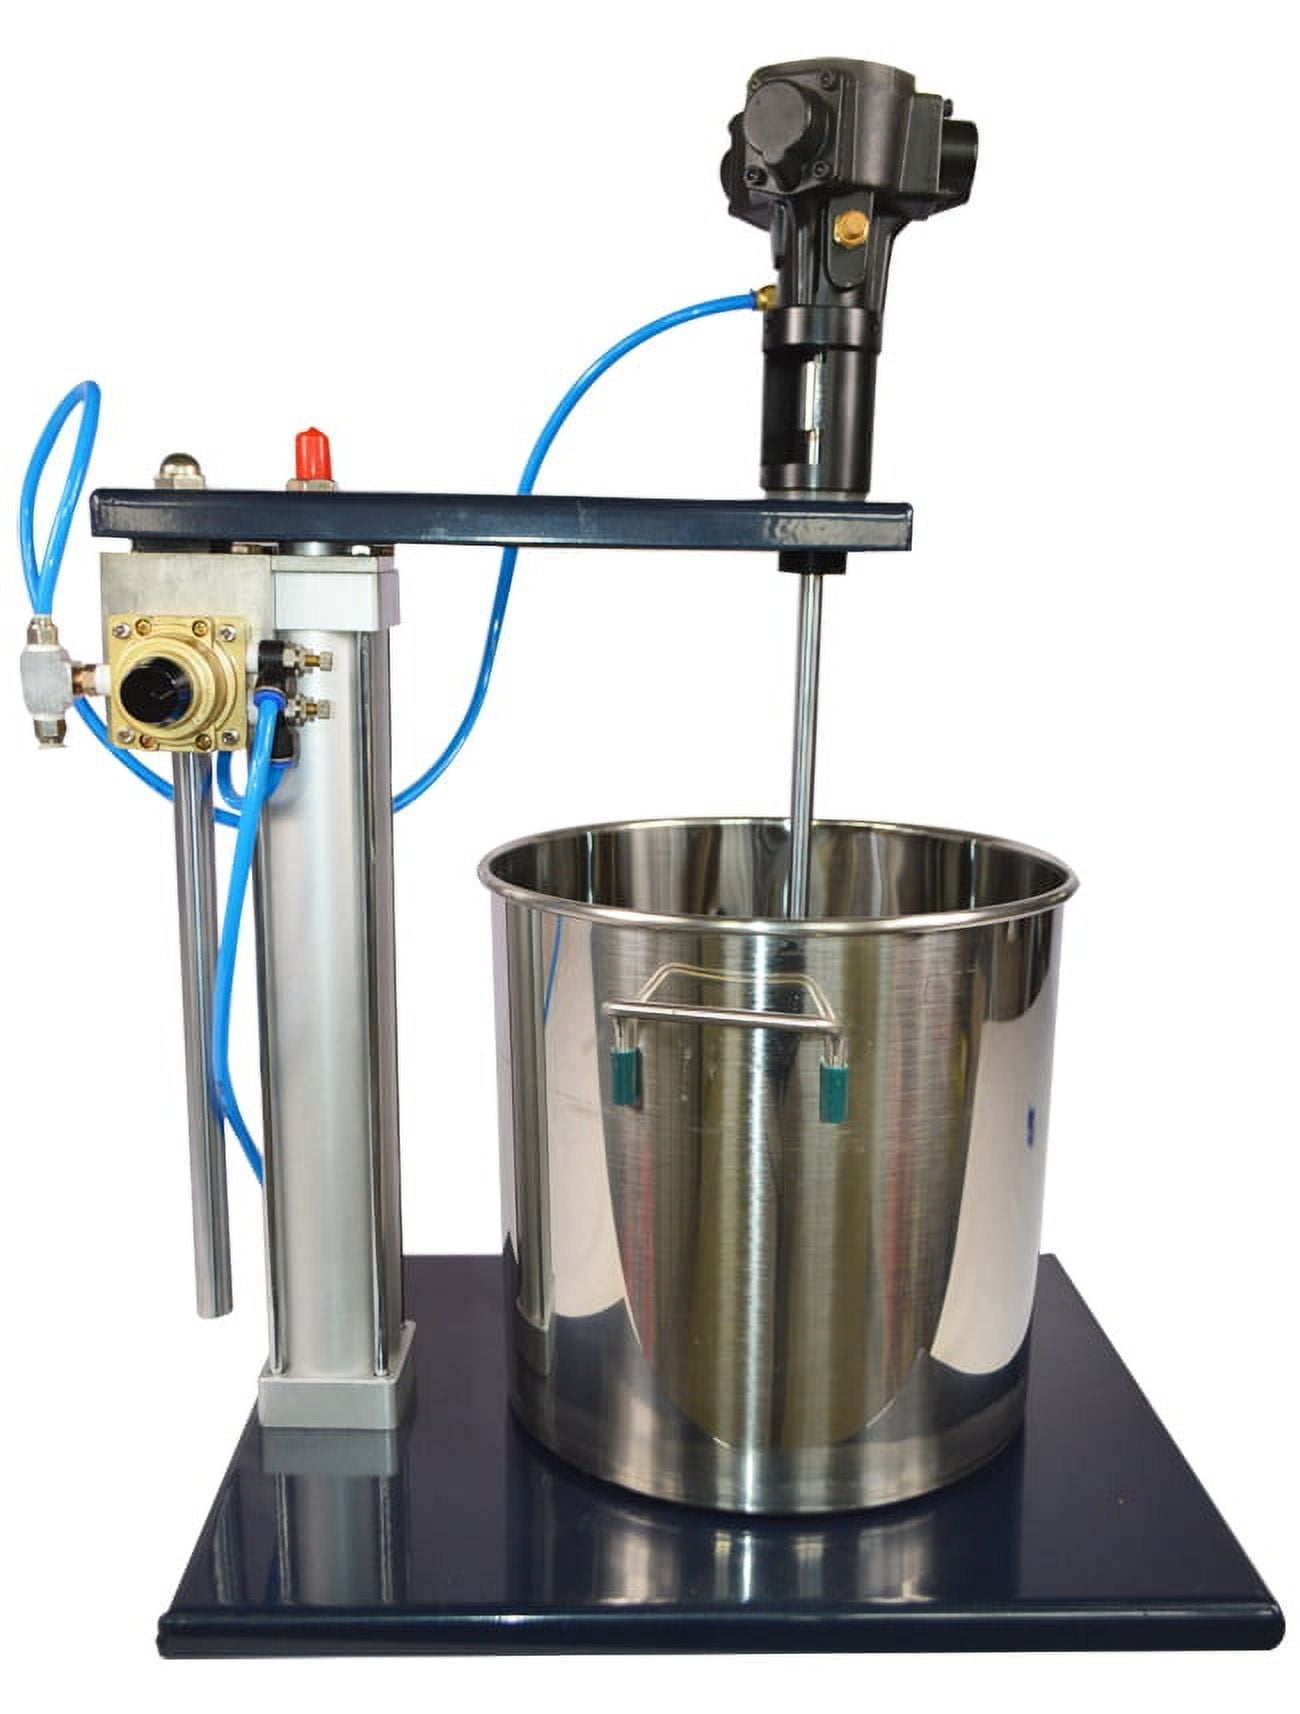 VPABES 5 Gallon Pneumatic Mixer, Automatic Paint Stirring Machine Ink  Coating Mixing Tool with Stand, 2600RPM Stainless Steel